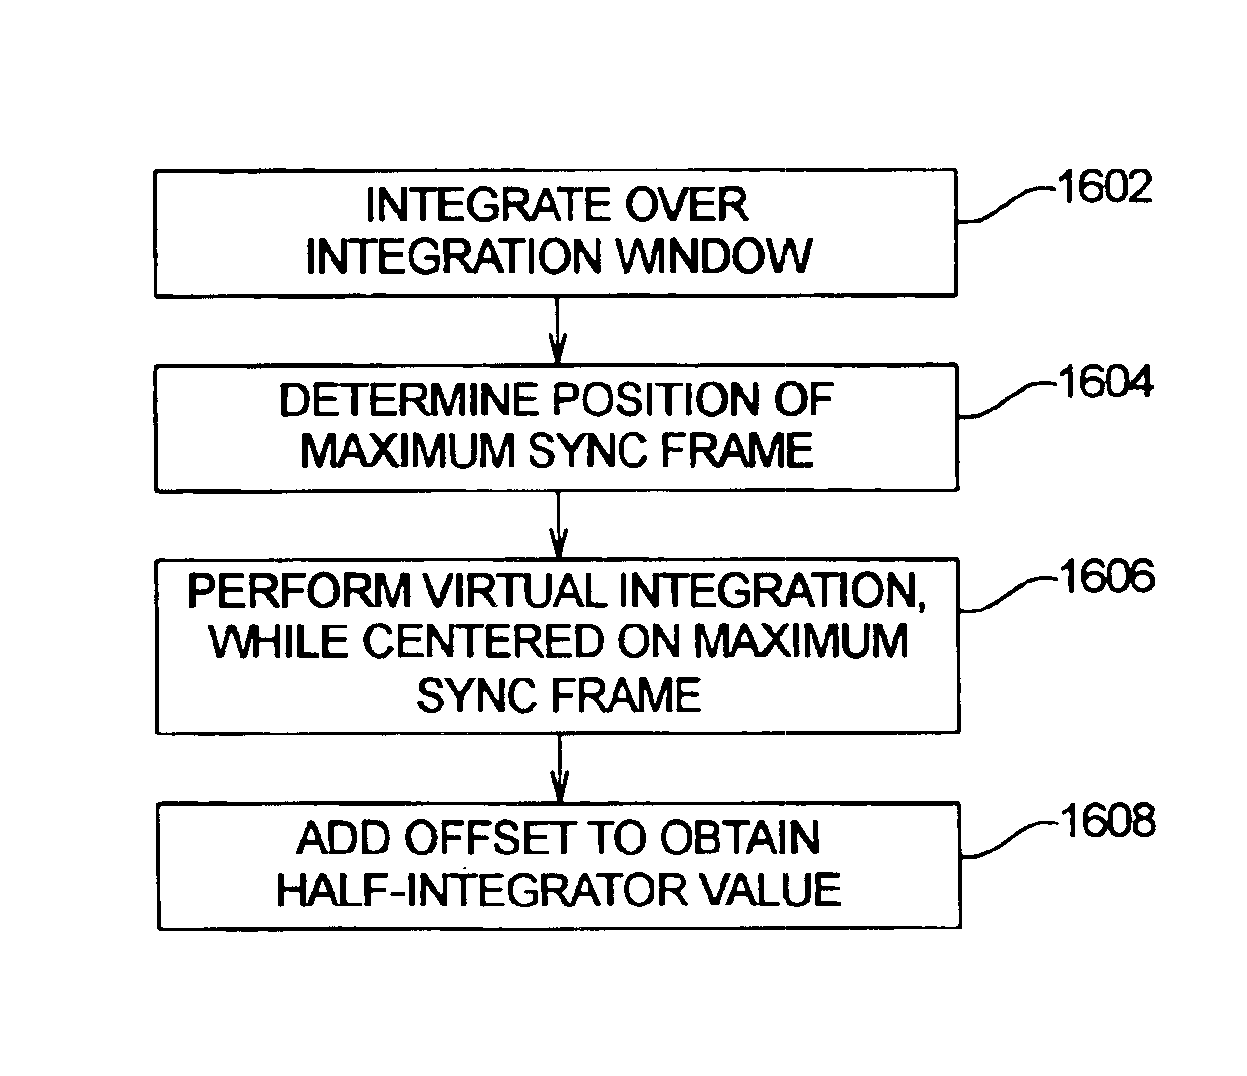 Method and apparatus for determining a transducer's reference position in a disk drive having a disk surface with spiral servo information written thereon